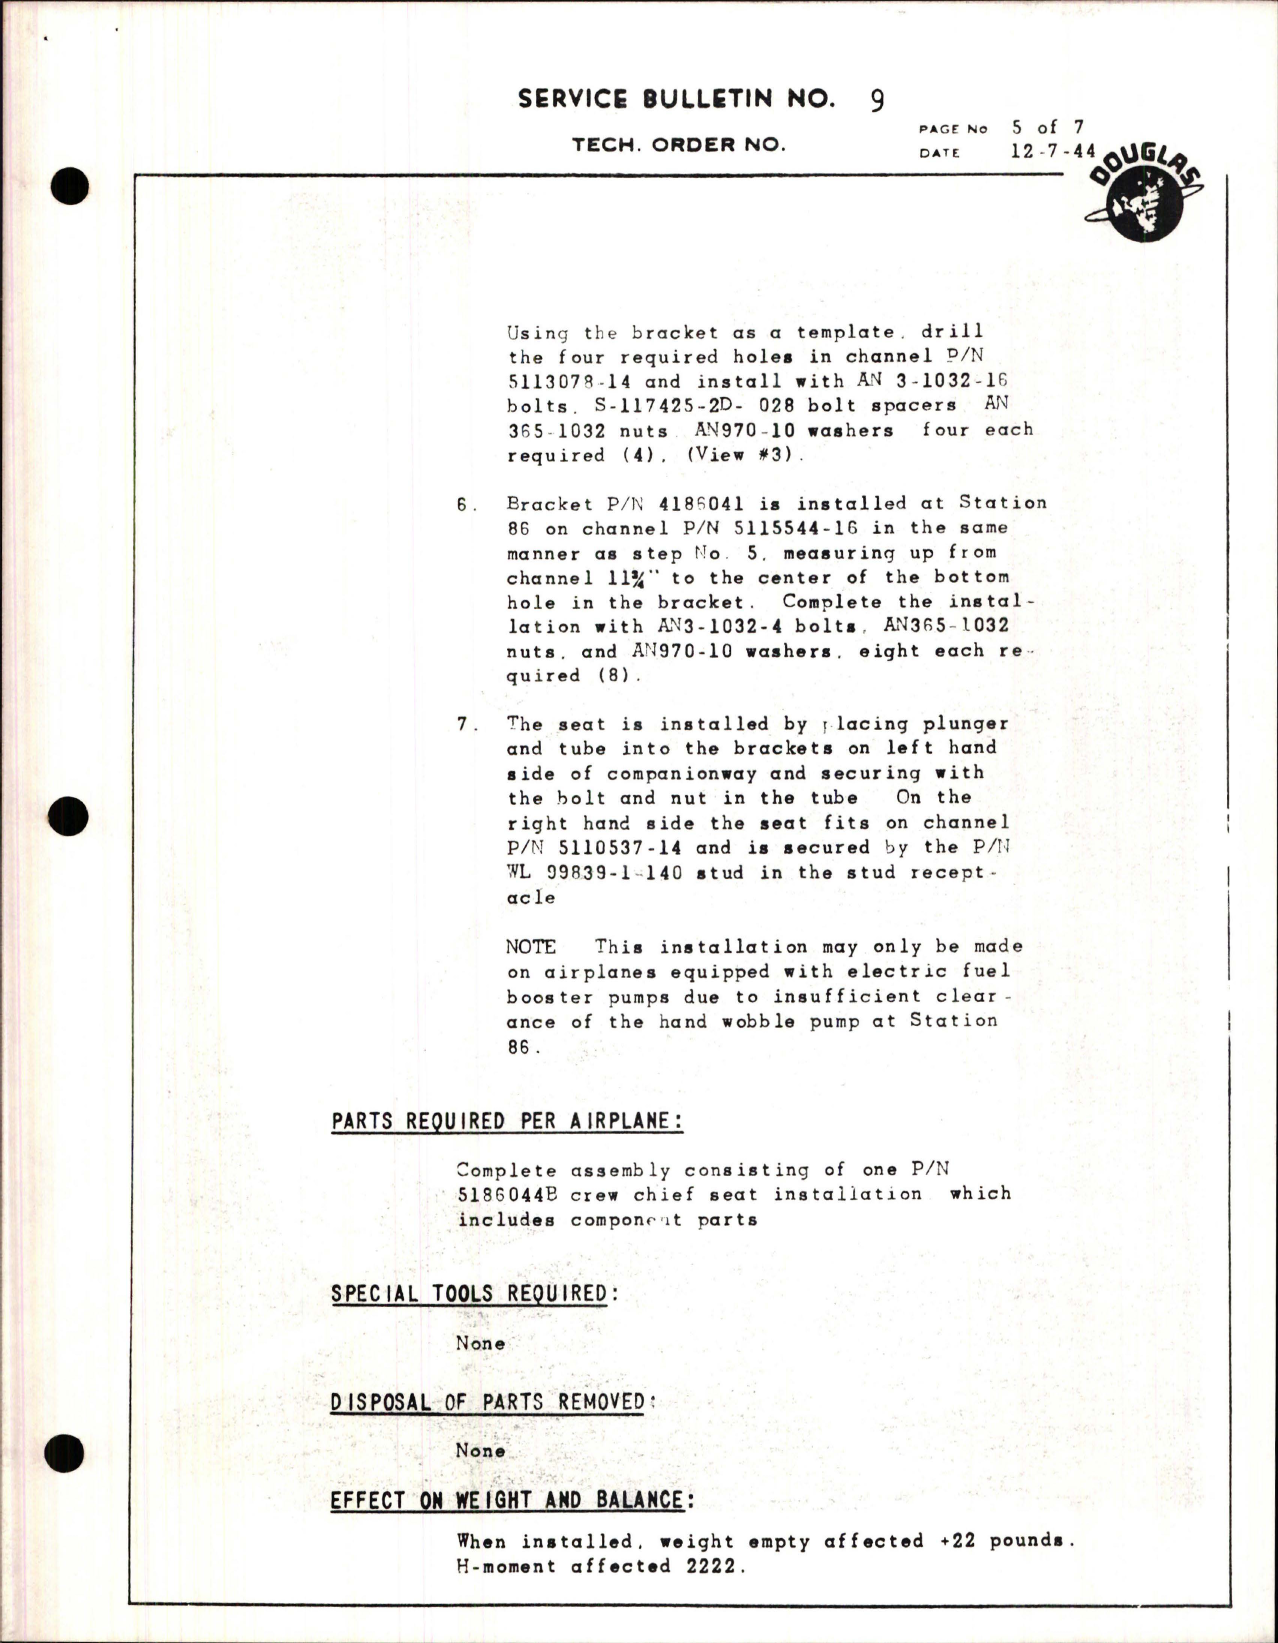 Sample page 5 from AirCorps Library document: Installation of Flight Engineer's Seat